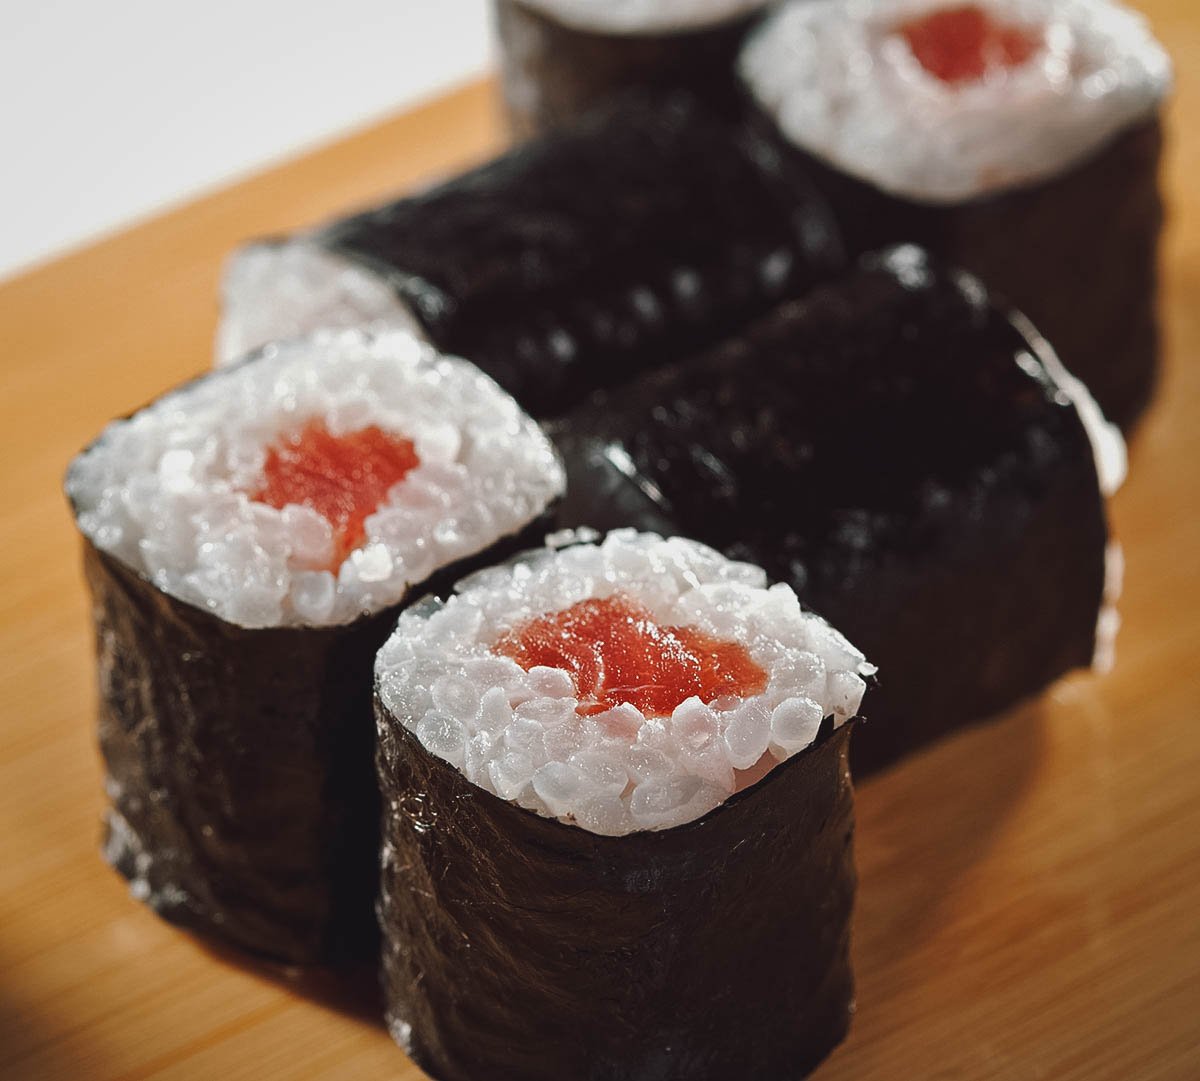 Tuna maki roll, one of the most popular types of sushi rolls in Japan